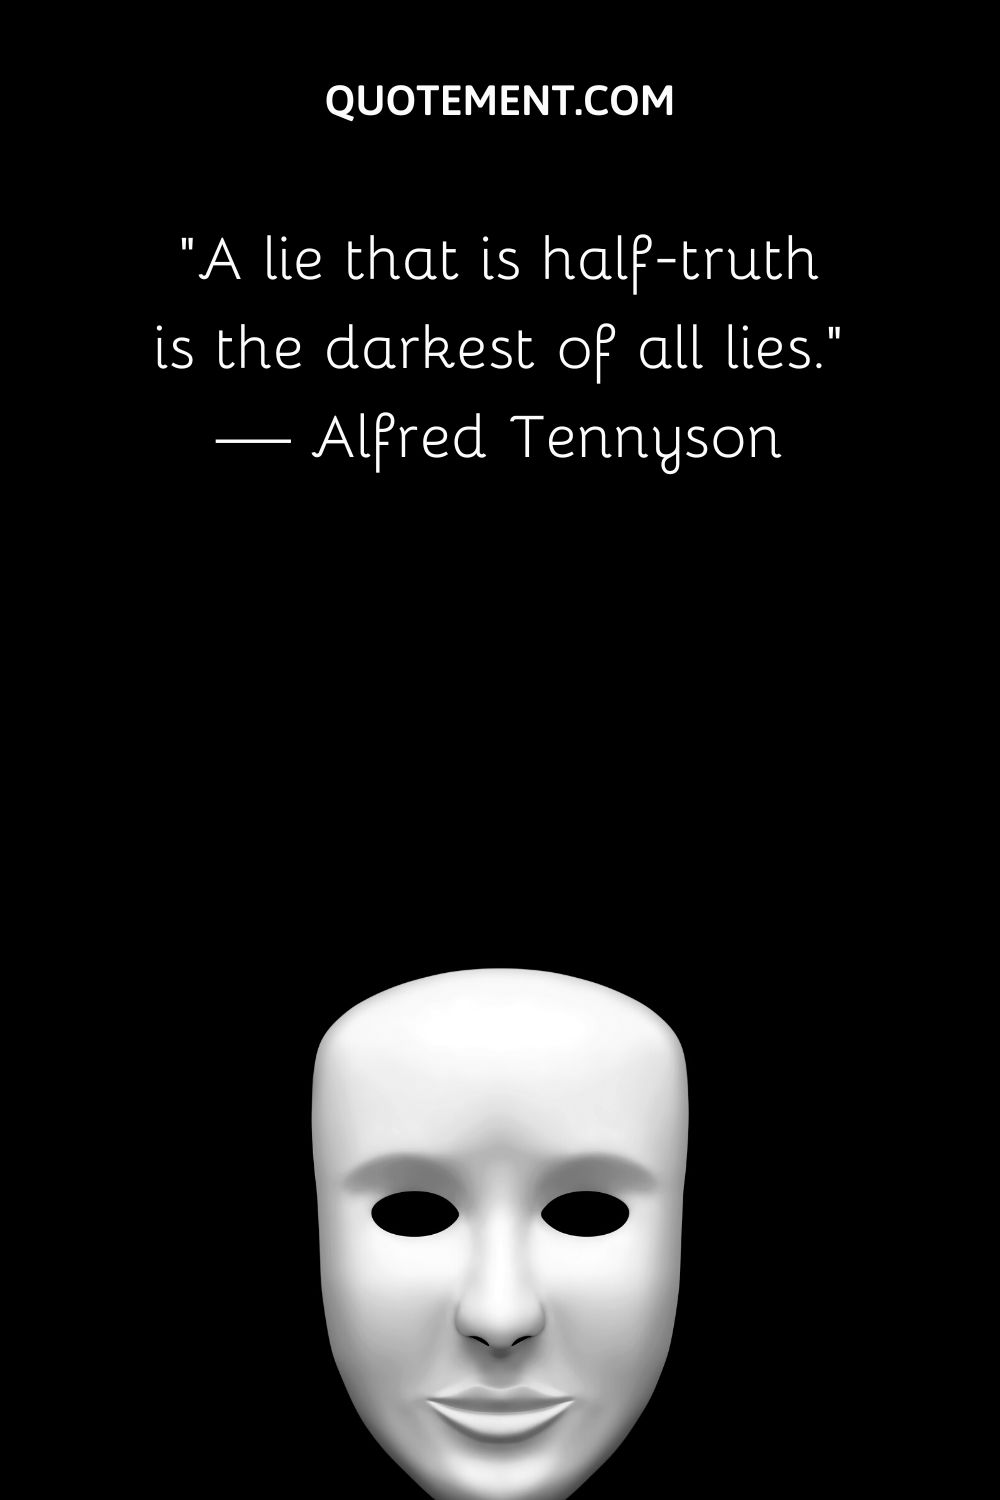 A lie that is half-truth is the darkest of all lies